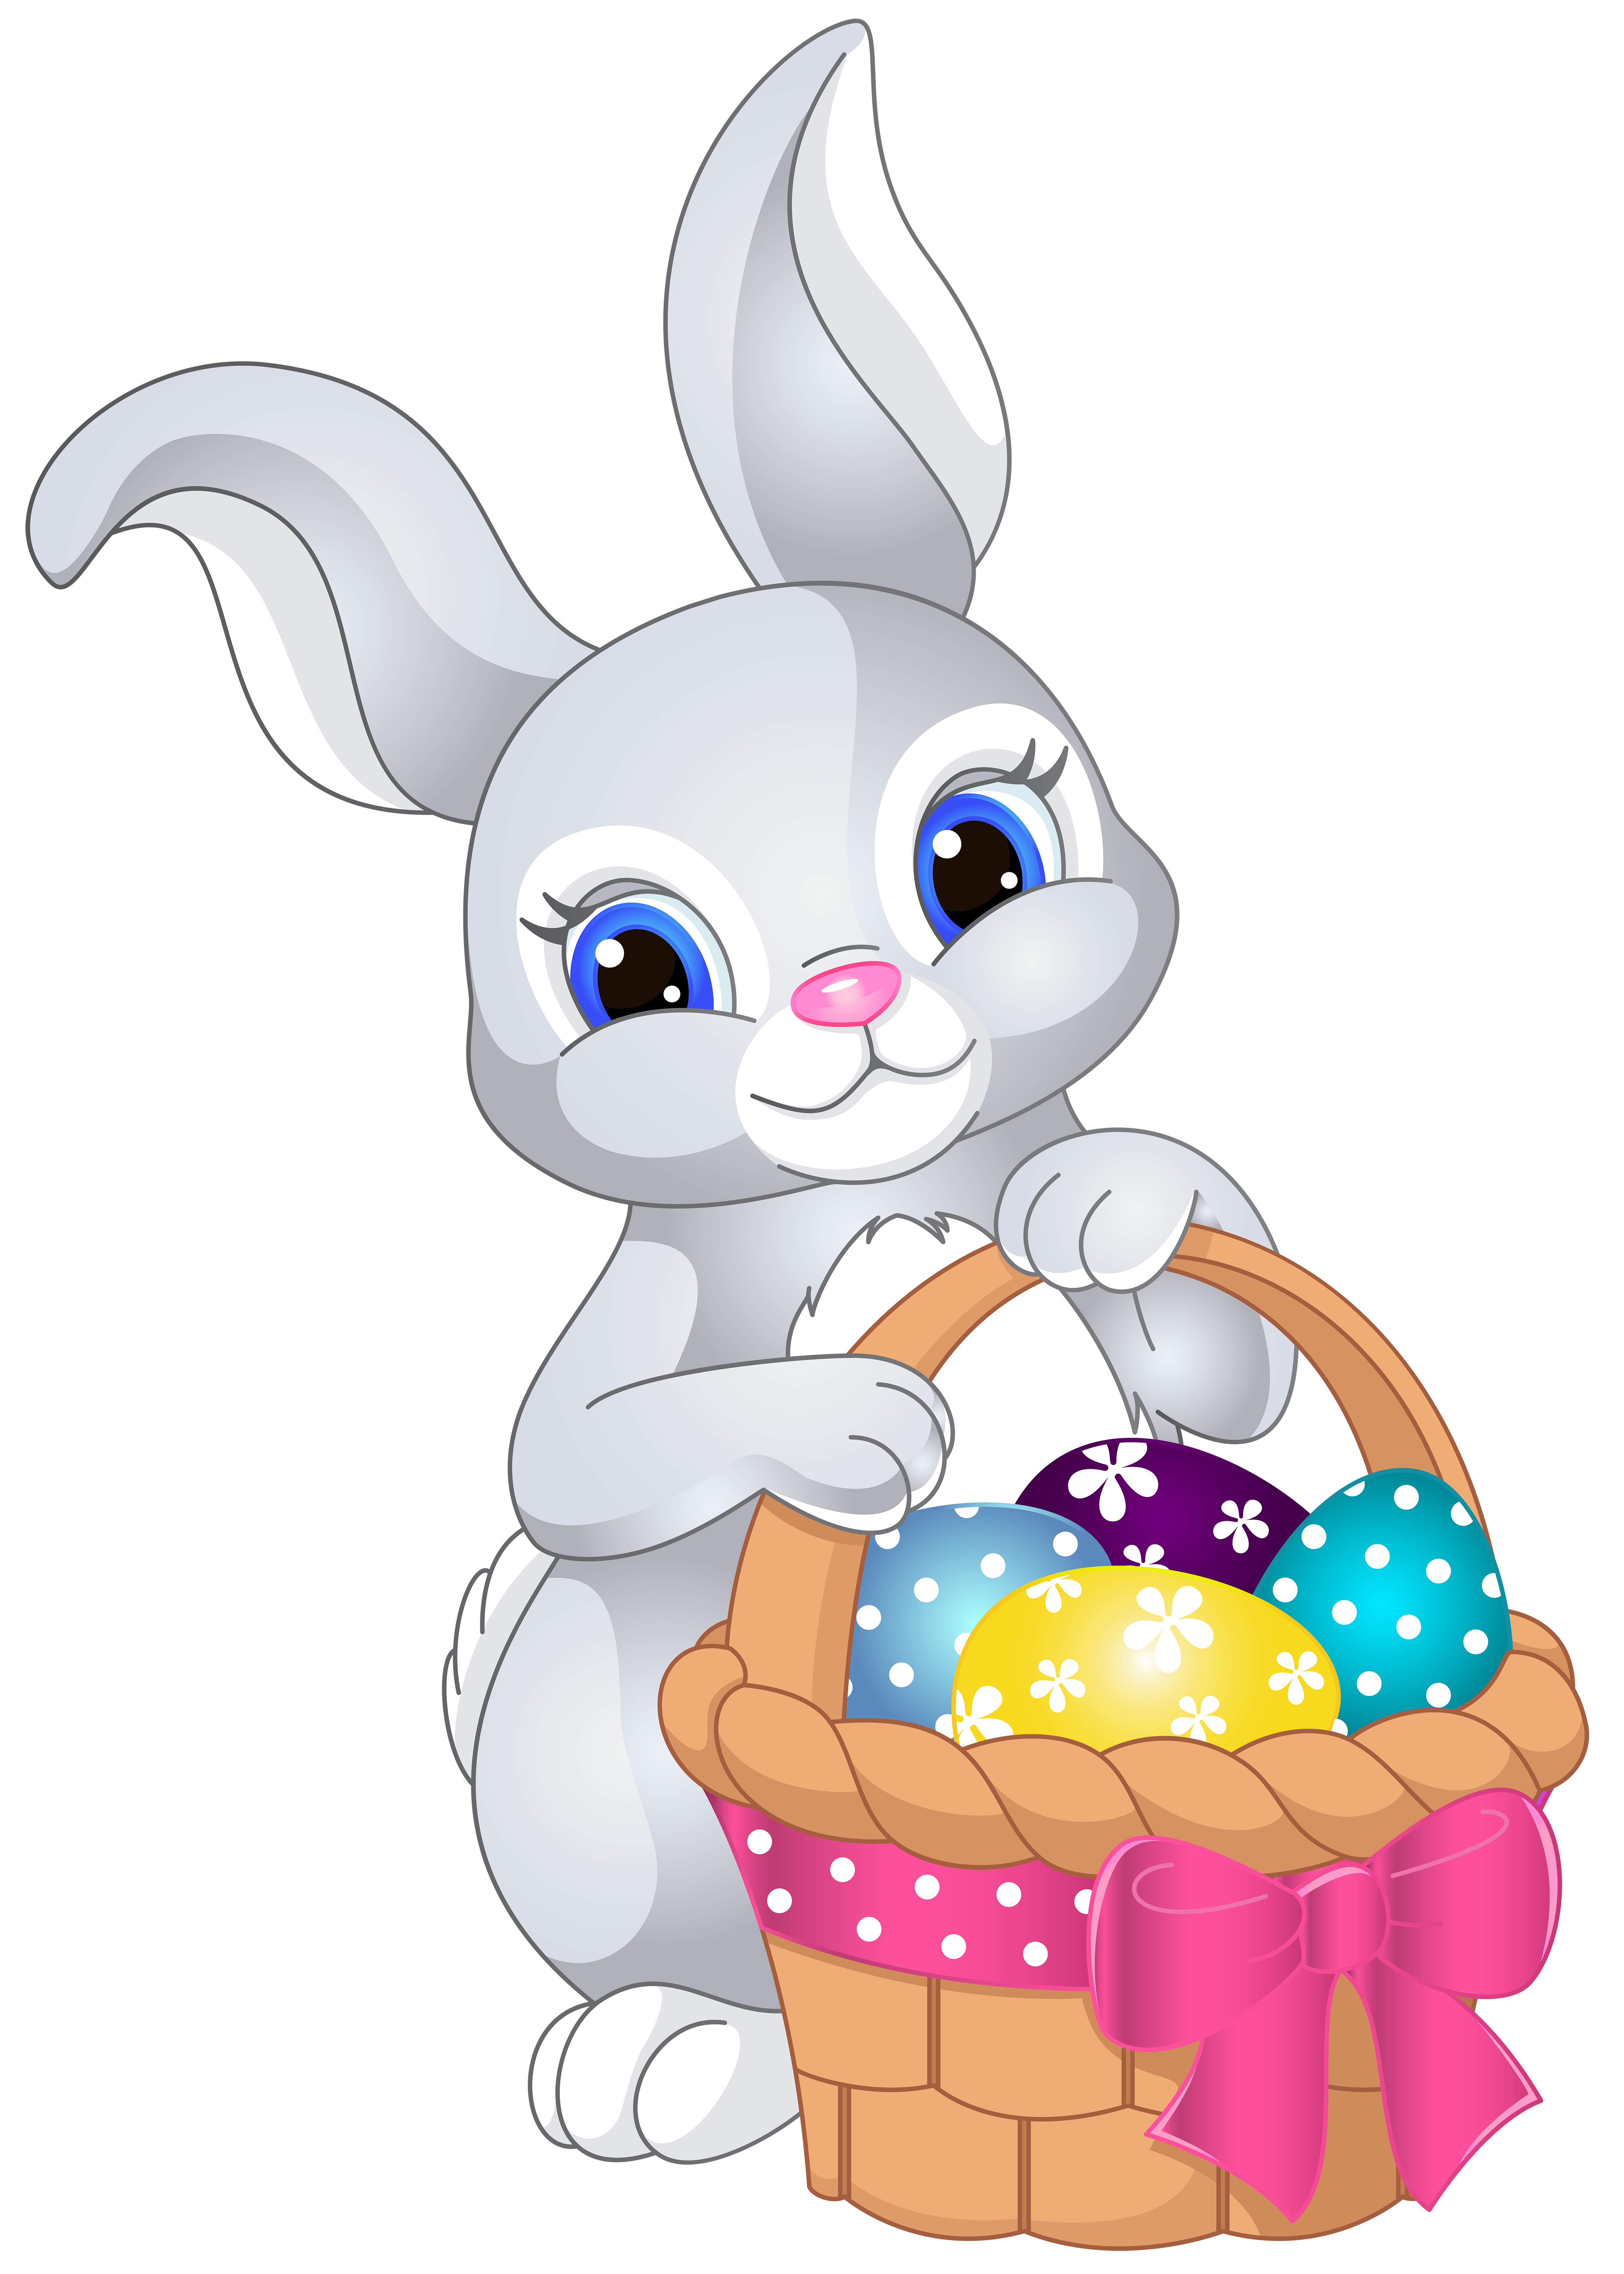 Easter Bunny with Egg Basket PNG Clip Art Image | Gallery ...